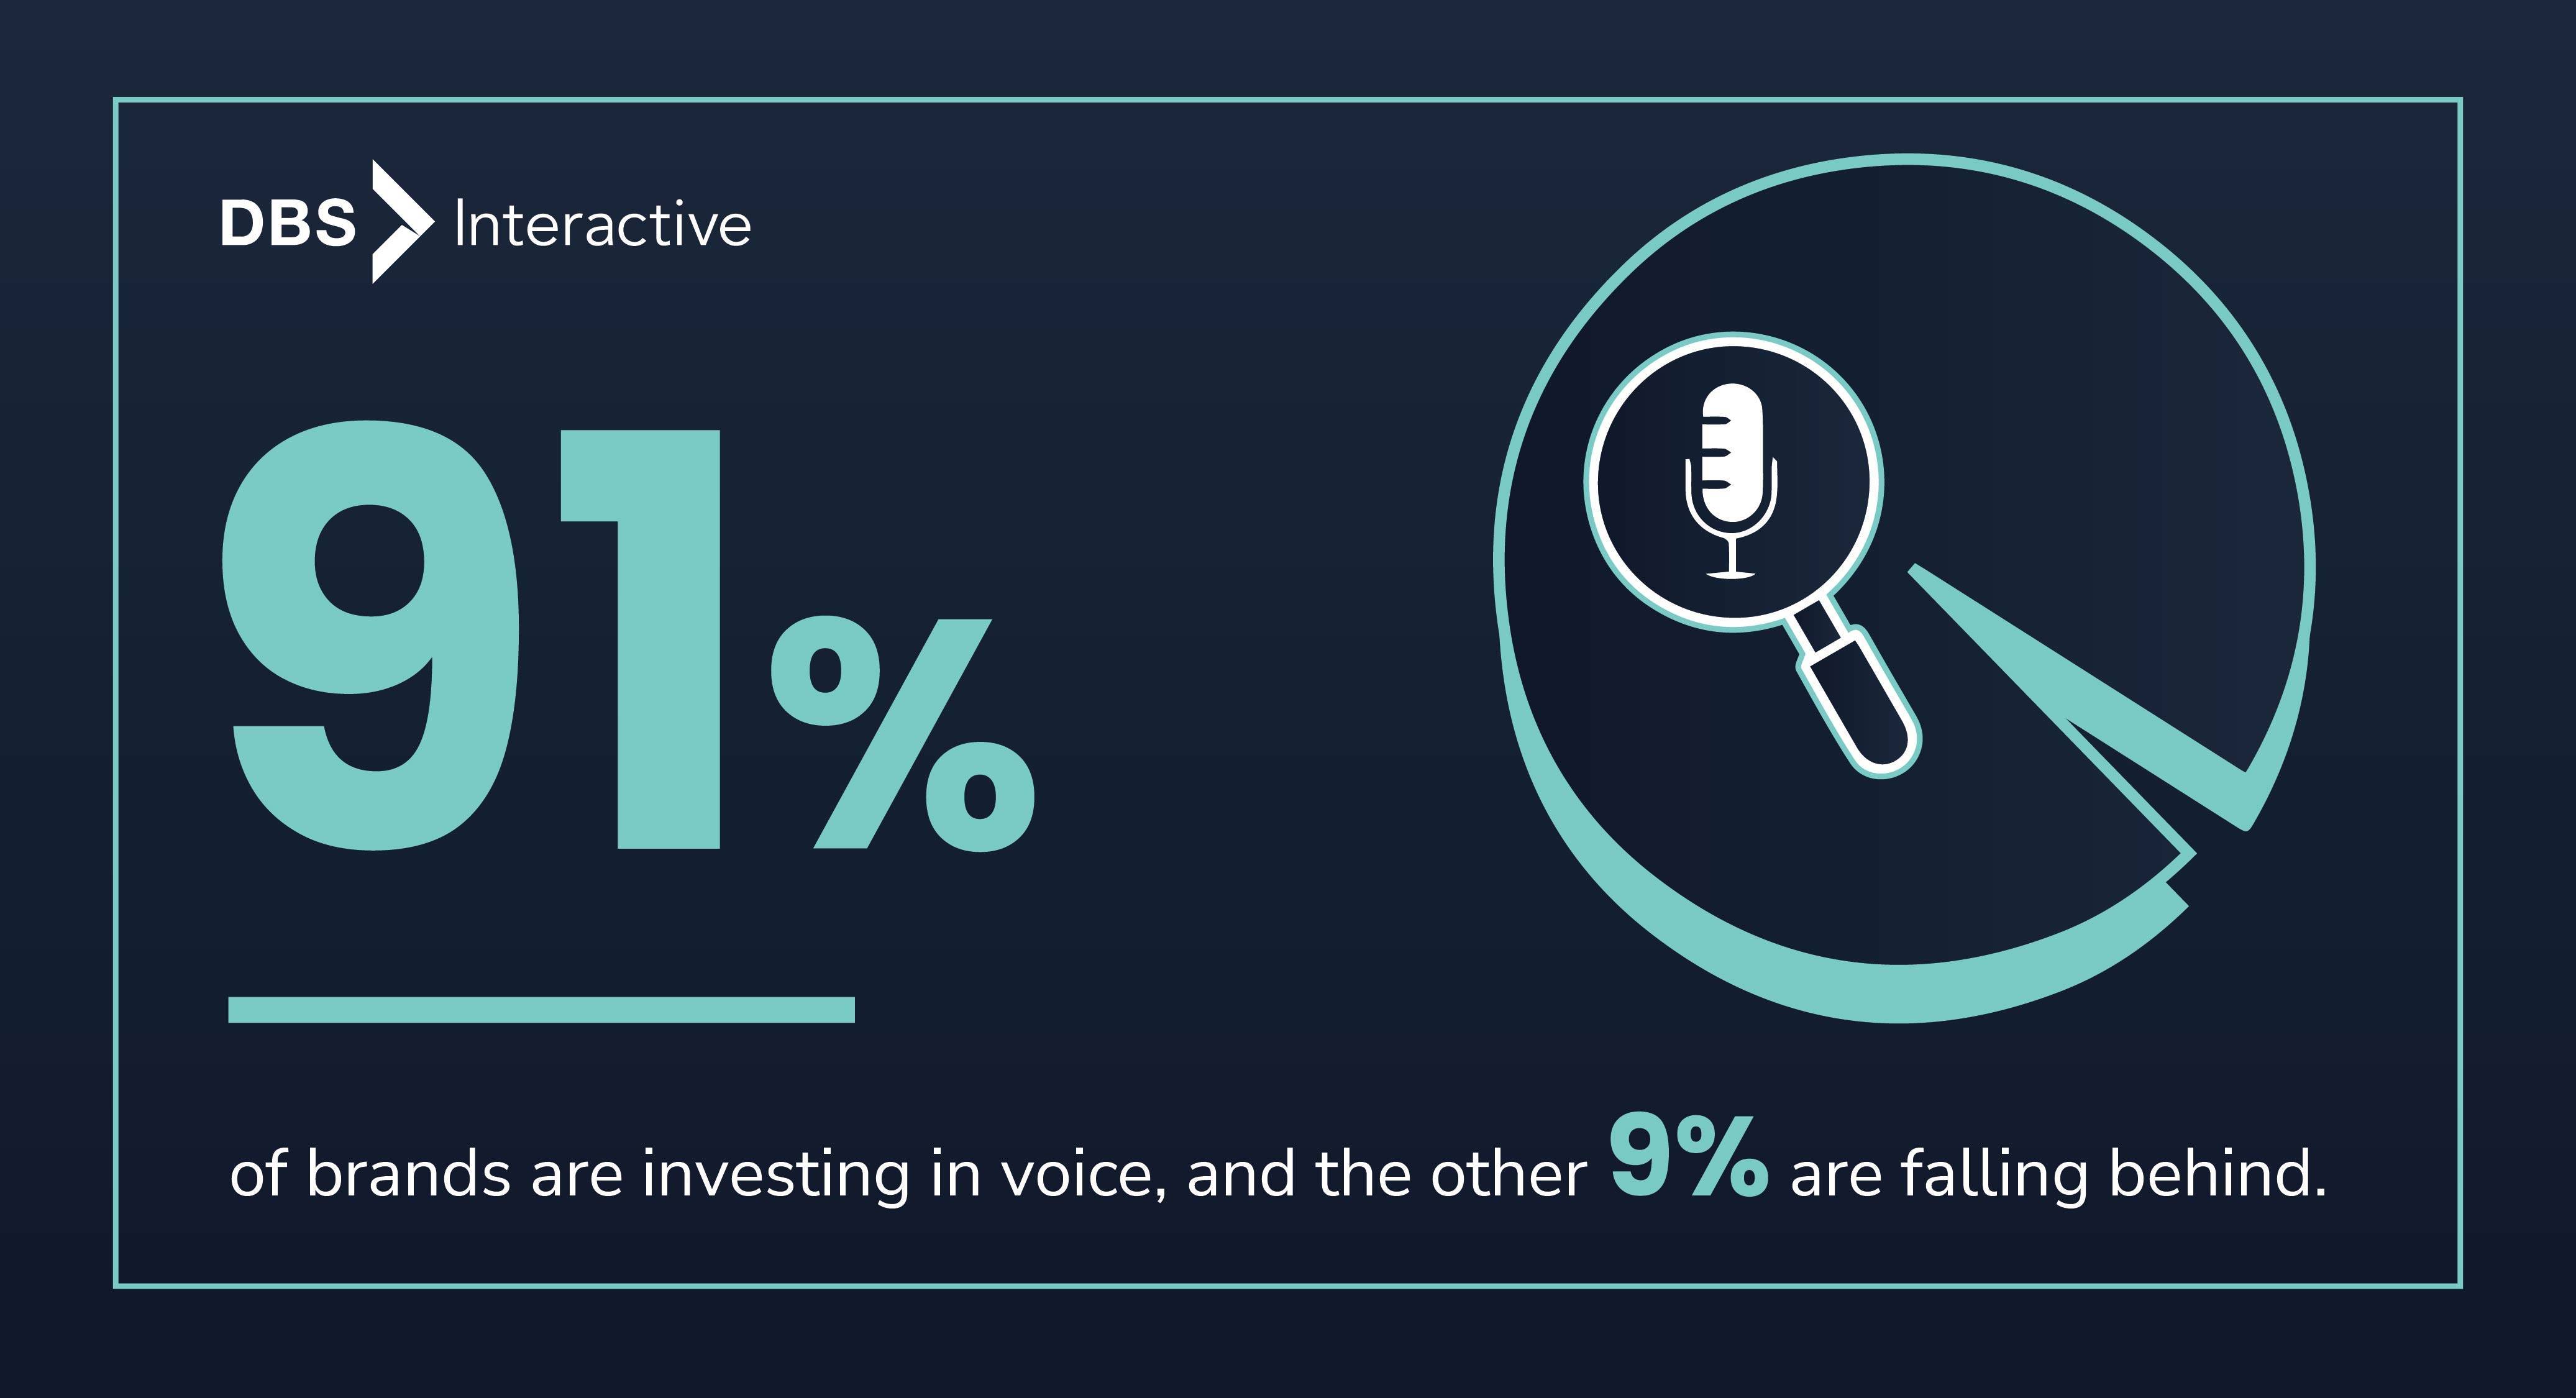 91% of brands are investing in voice, and the other 9% missing out